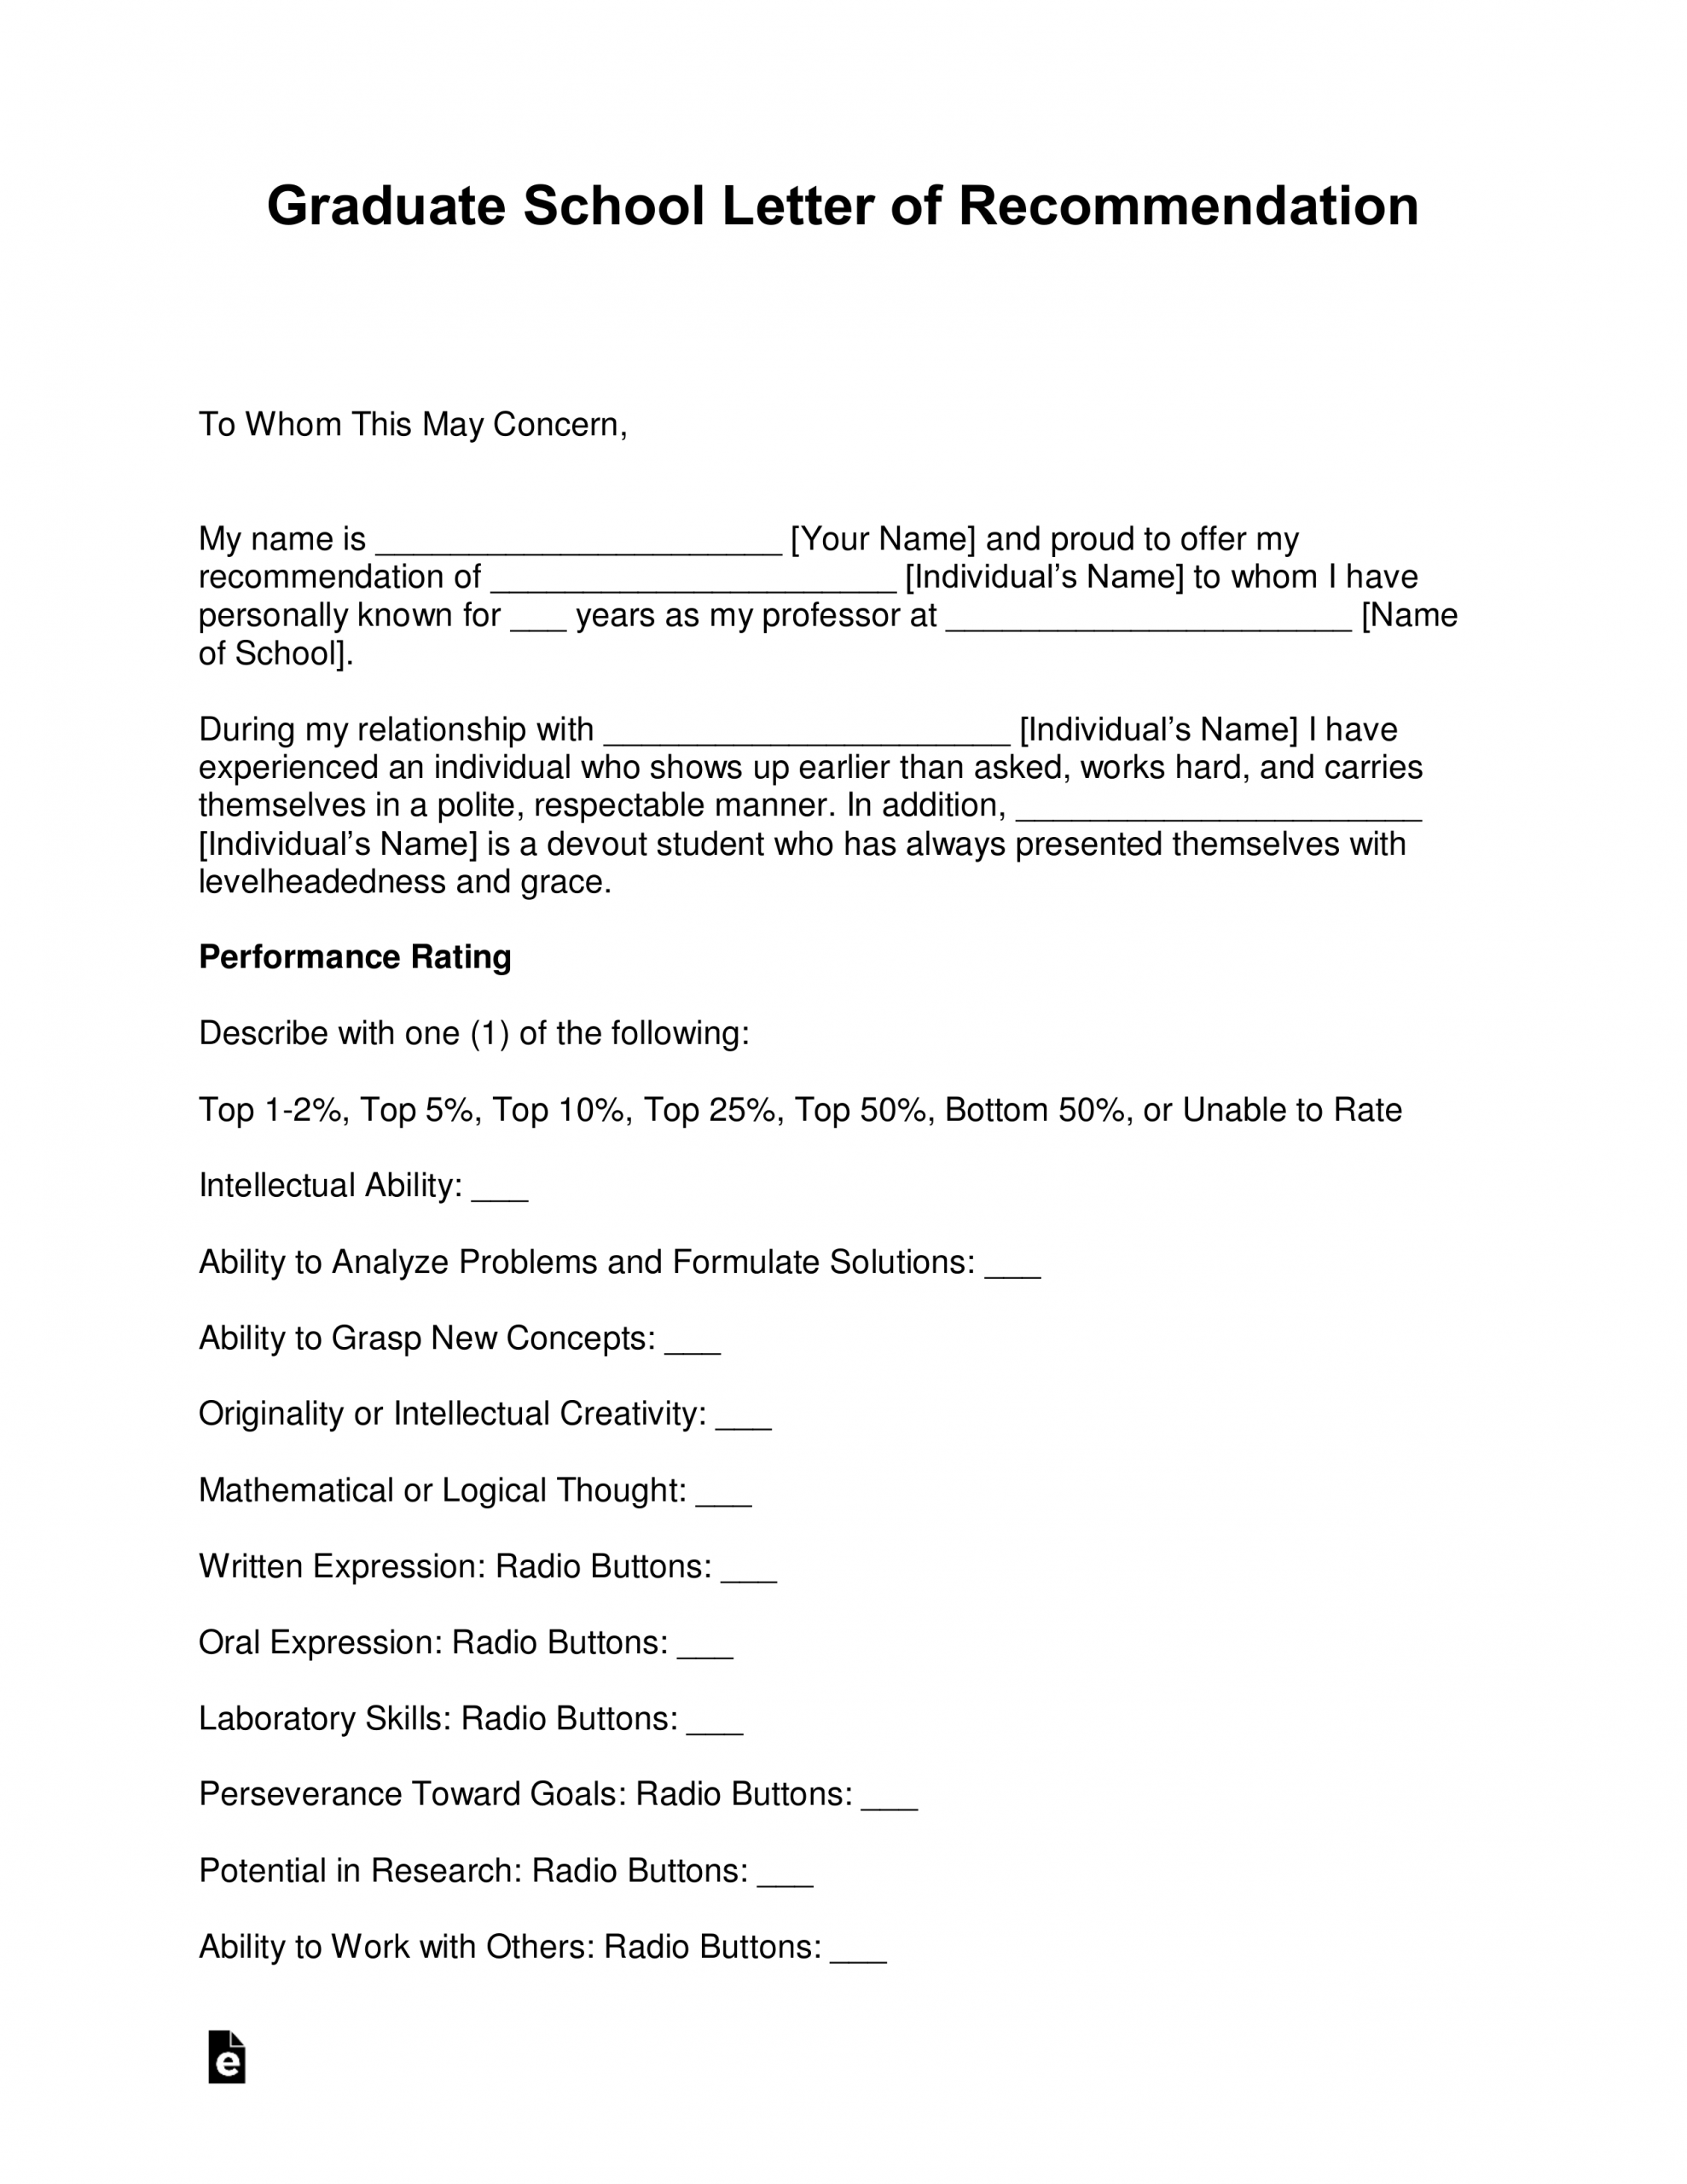 Free Graduate School Letter Of Recommendation Template with regard to dimensions 2550 X 3301